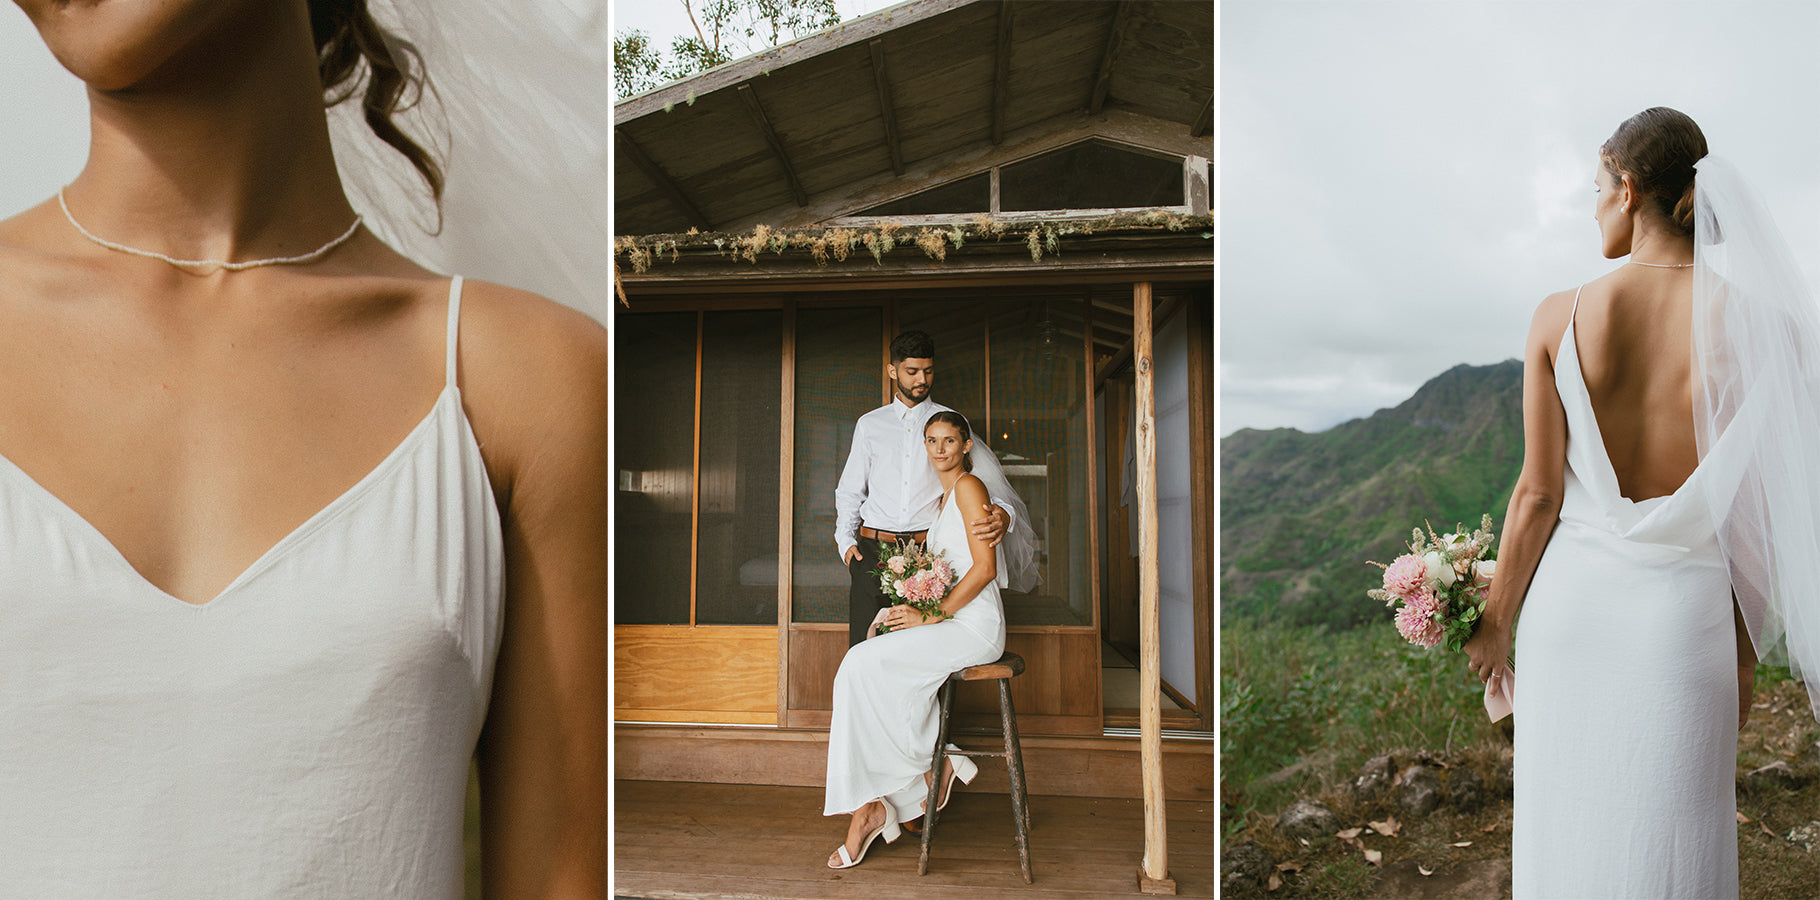 Bride and groom portrait in front of cabin and overlooking mountains on Oahu